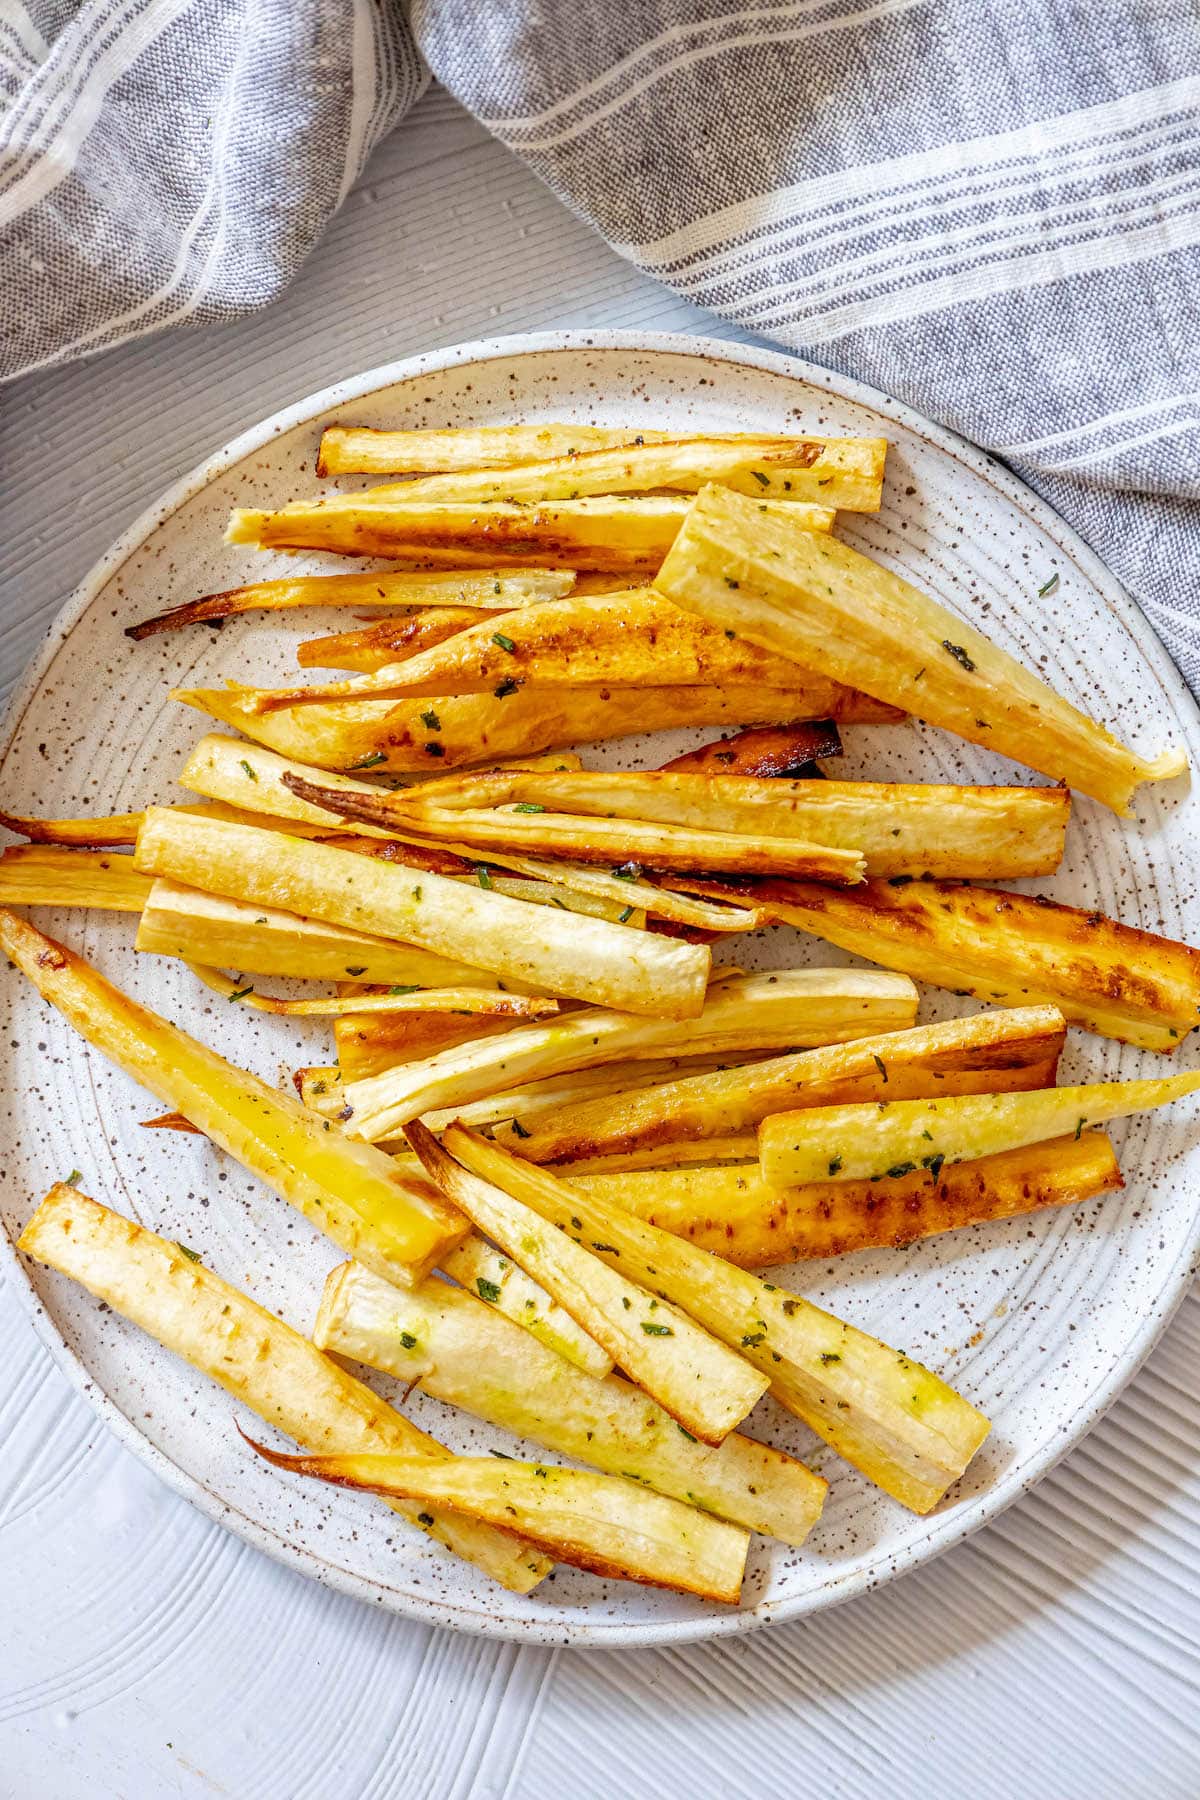 roasted parsnips seasoned with garlic butter and herbs on a white speckled plate next to a blue striped tea towel